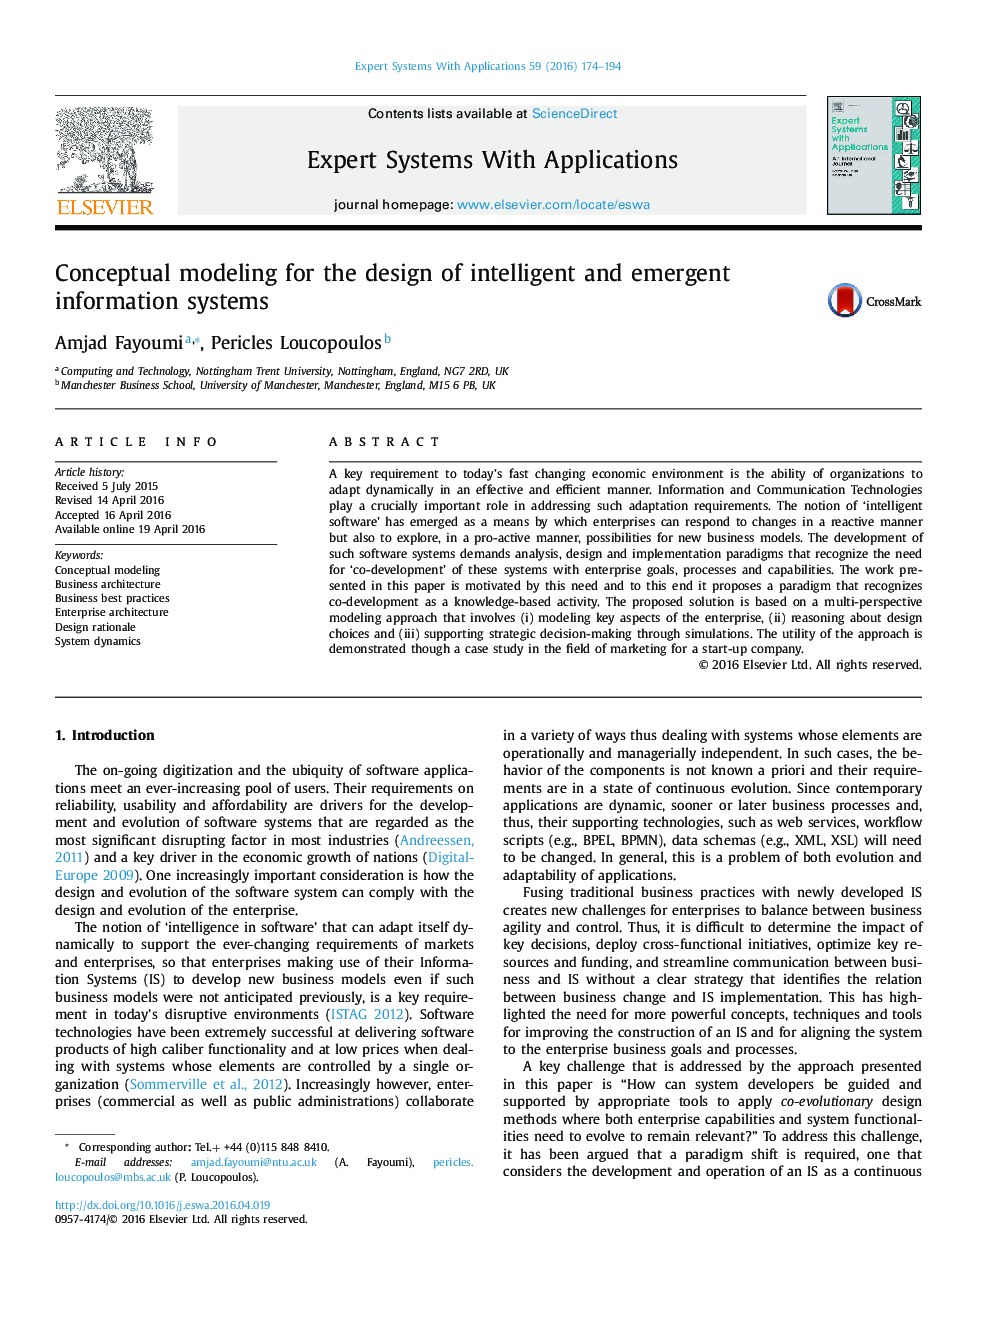 Conceptual modeling for the design of intelligent and emergent information systems